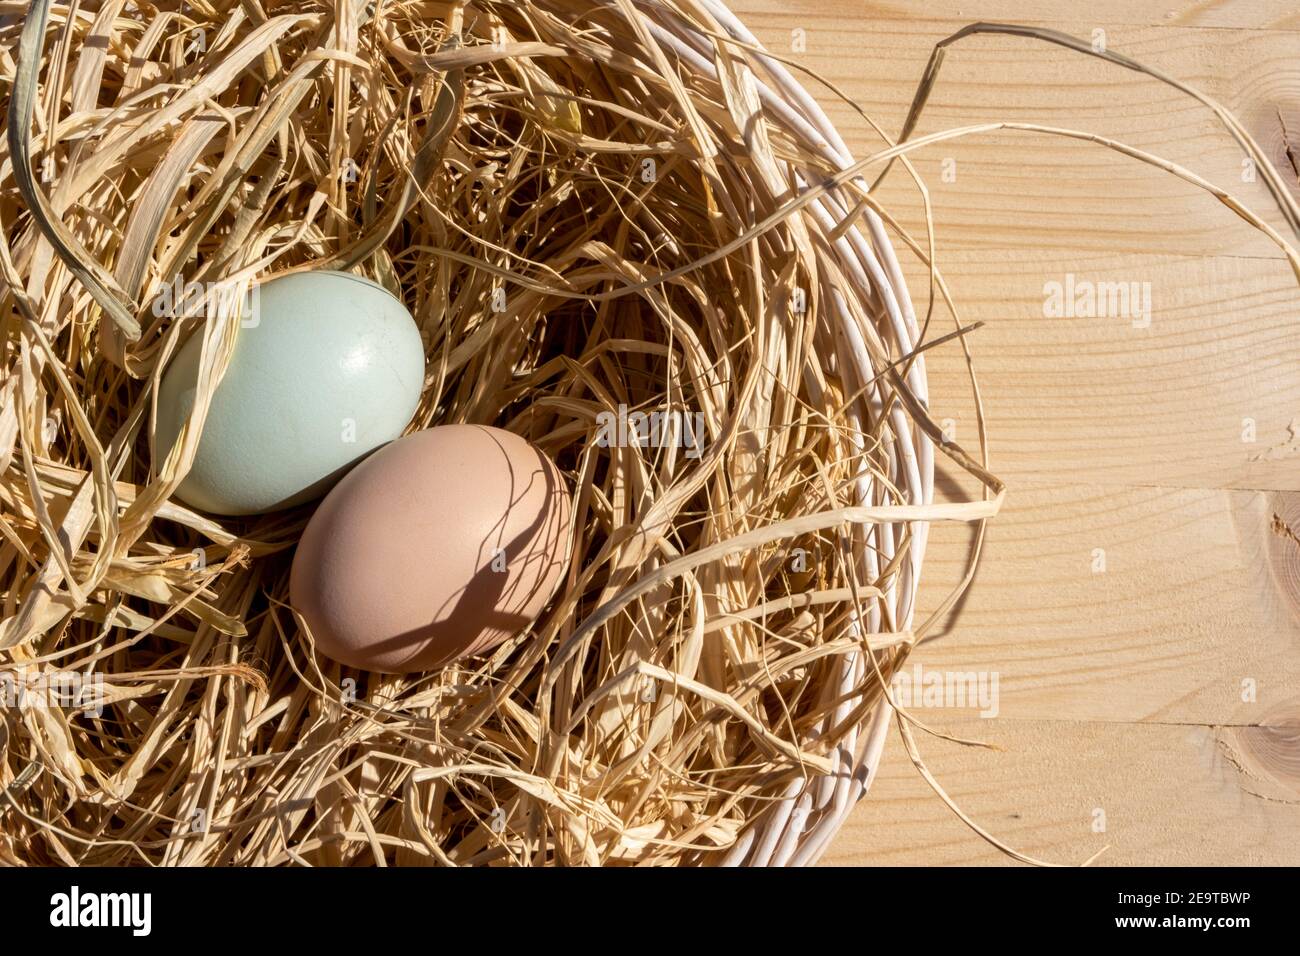 Organic Easter concept: Top view on a basket filled with straw and two natural colored eggs from the farm. Sun light falling on still life. Wood table Stock Photo